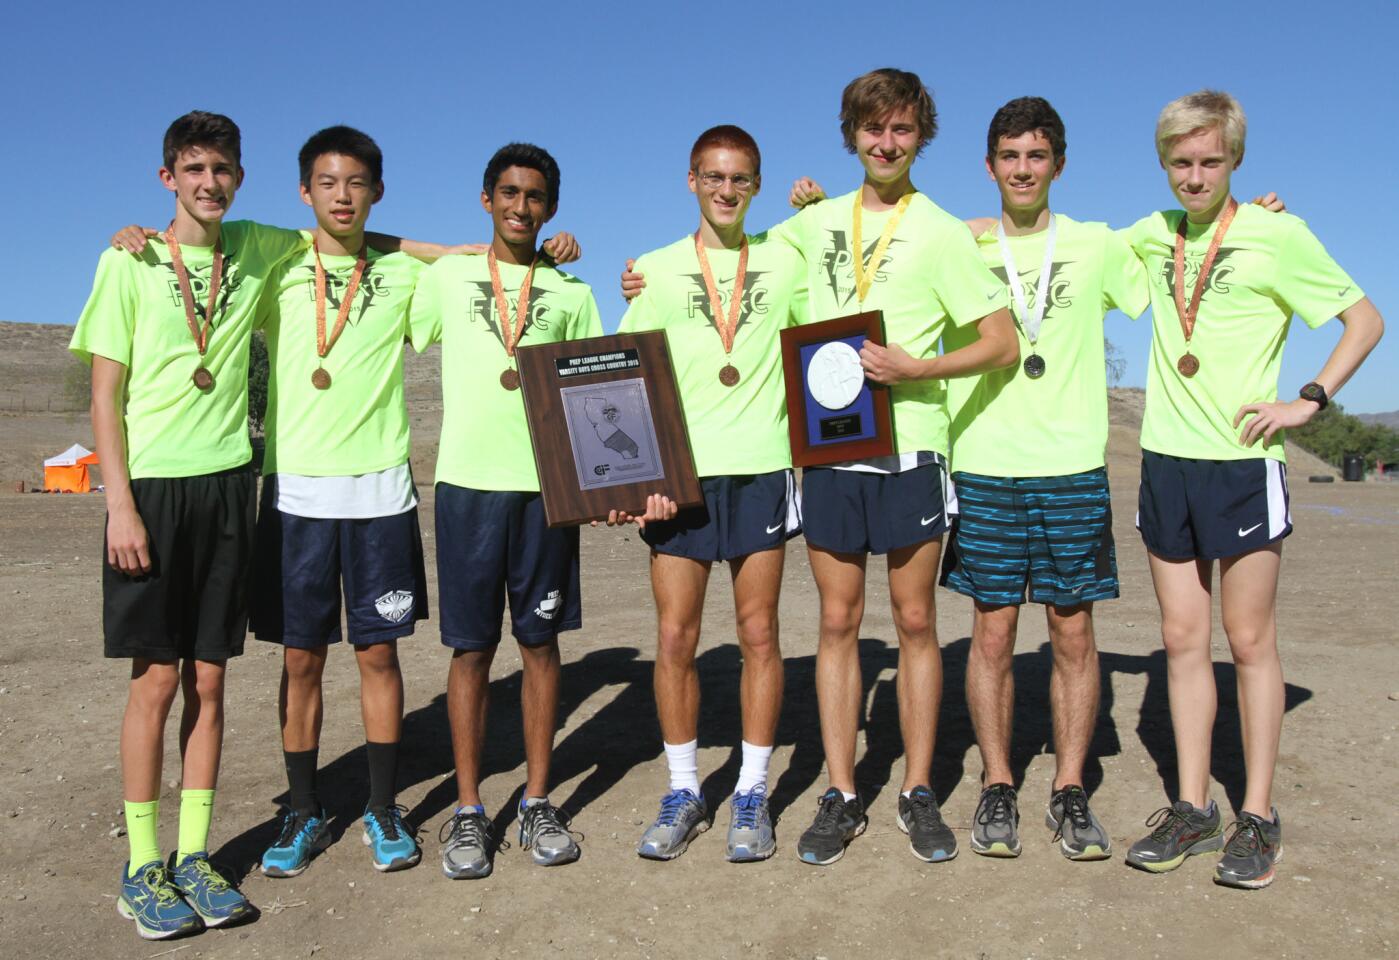 Flintridge Prep boys' varsity cross country runners, led by league MVP Jack Van Scoter, third from right, took the league title with runners finishing in the top five spots at the Prep League Cross Country Finals at Pierce College in Woodland Hills on Saturday, Oct. 31, 2015.